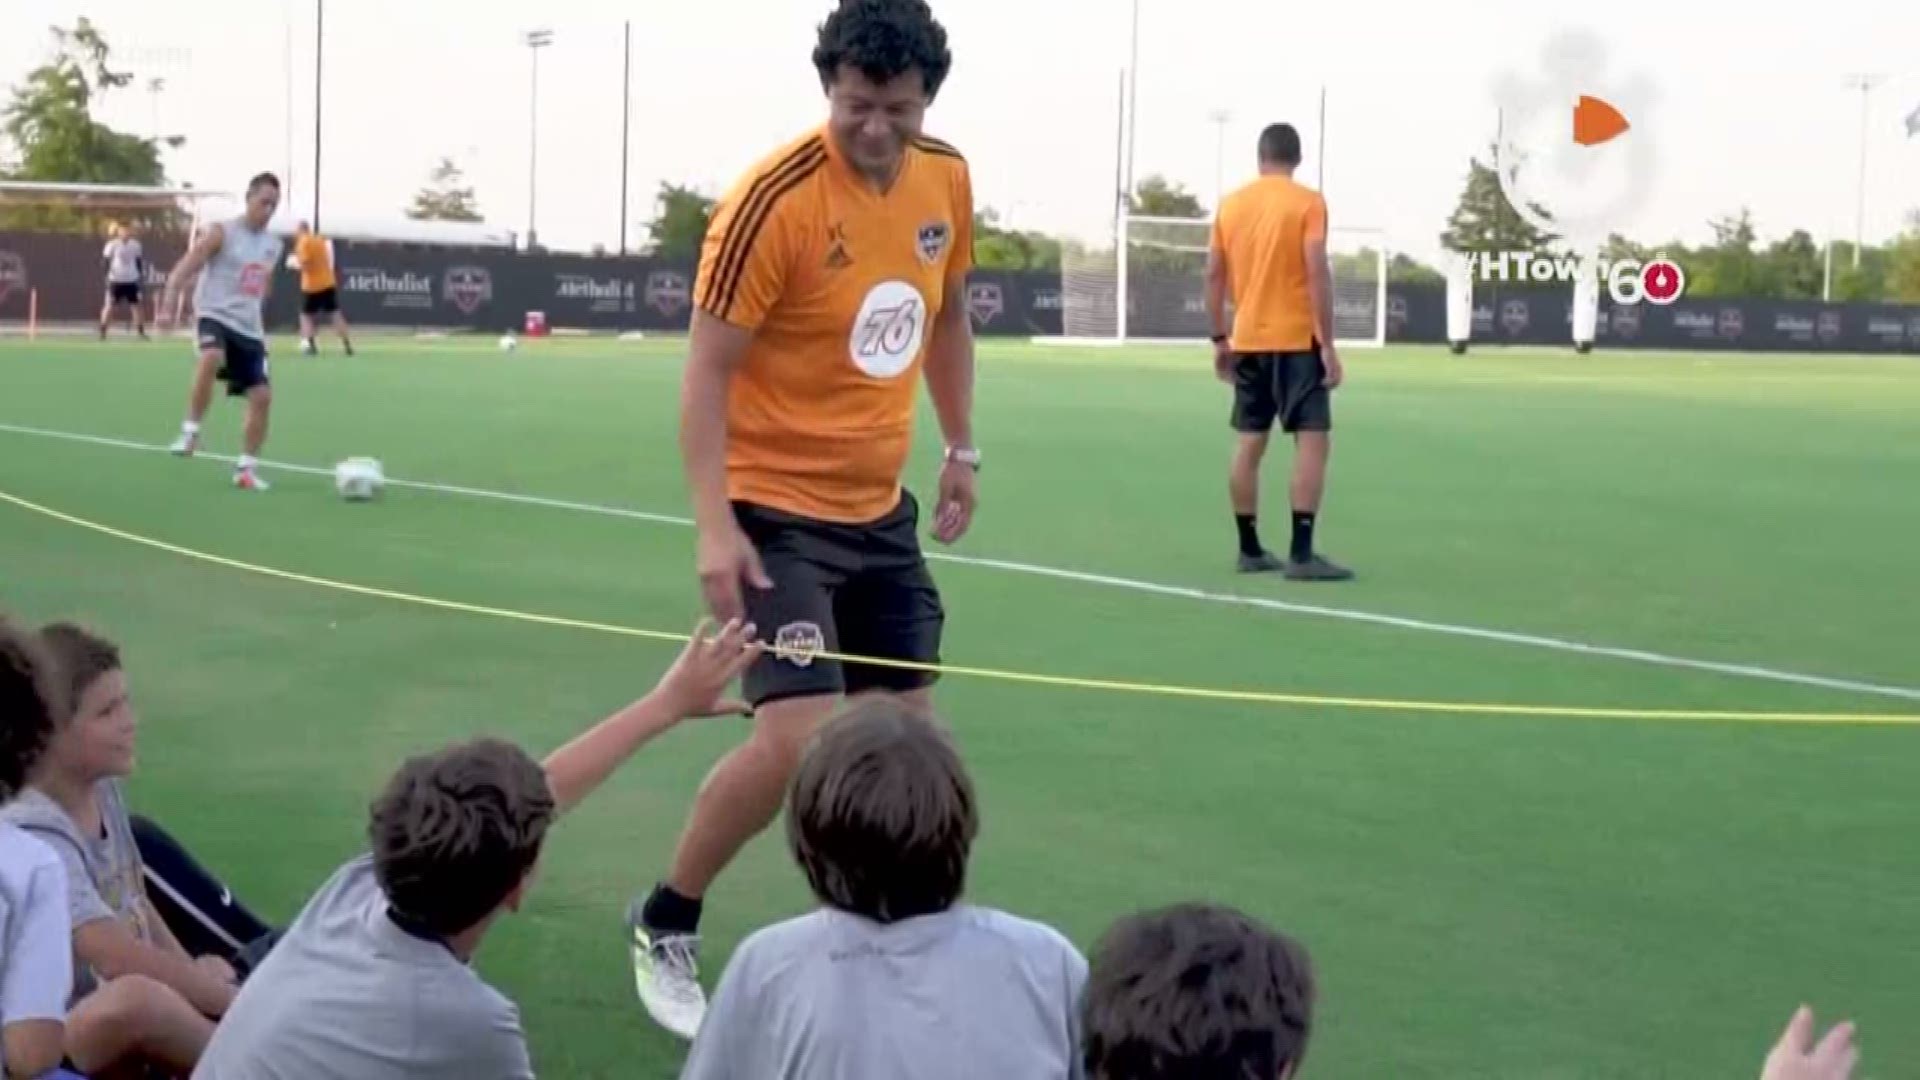 Parents, your kids can learn to play soccer like the pros this summer with the Dynamo and Dash youth soccer camps. Our Ruben Galvan shows us in this morning's HTown60.